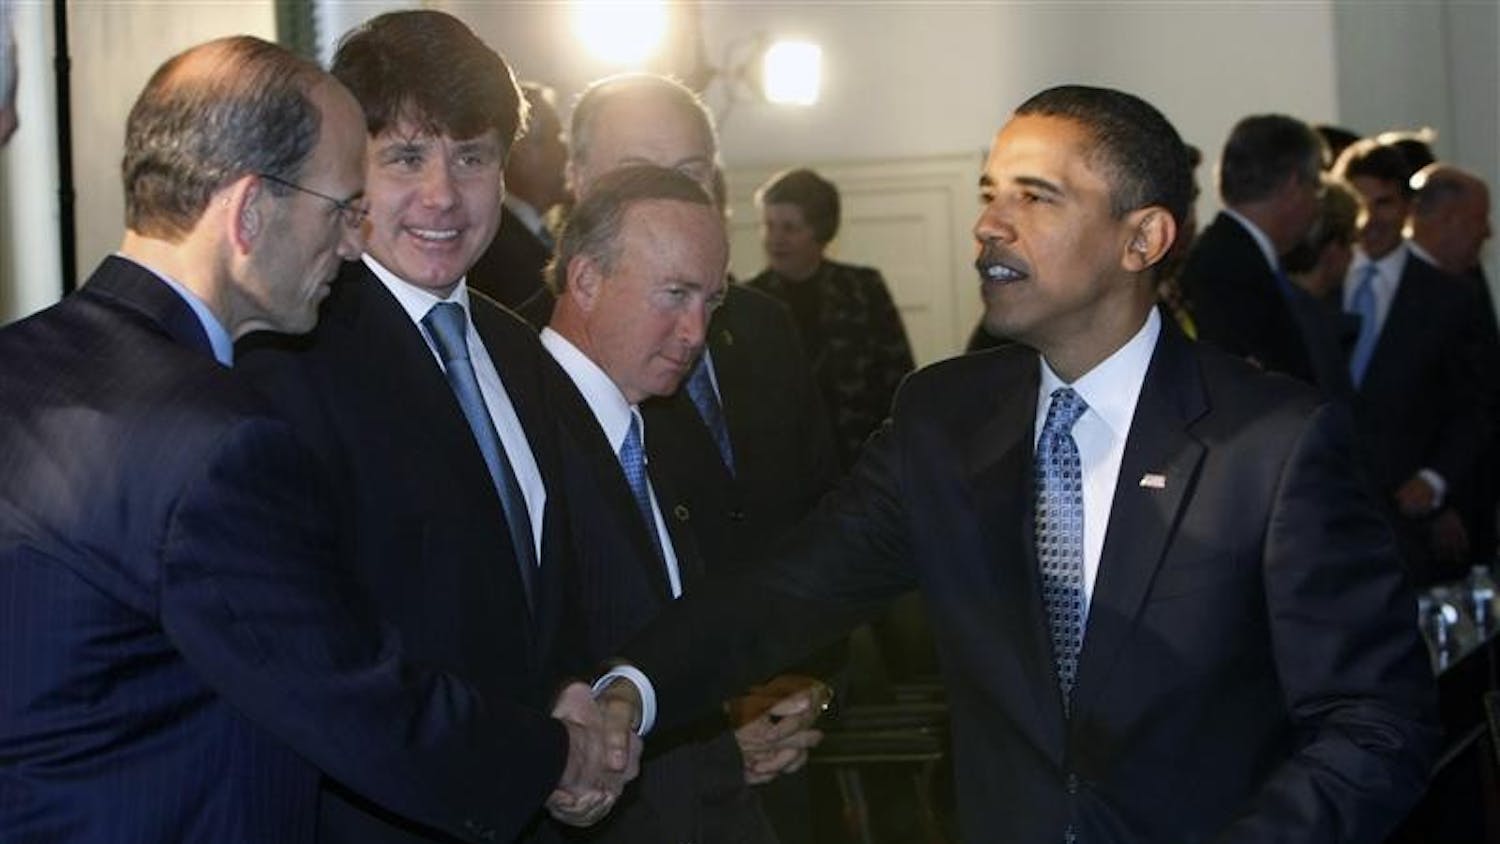 President-elect Barack Obama, right, greets Maine Gov. John Baldacci, left, at the Bipartisan meeting of the National Governor's Association on Tuesday at Congress Hall in Philadelphia, Pa. Looking on are,  Illinois Gov. Rob Blagojevich, left cente, and Gov. of Indiana, Mitch Daniels, center.